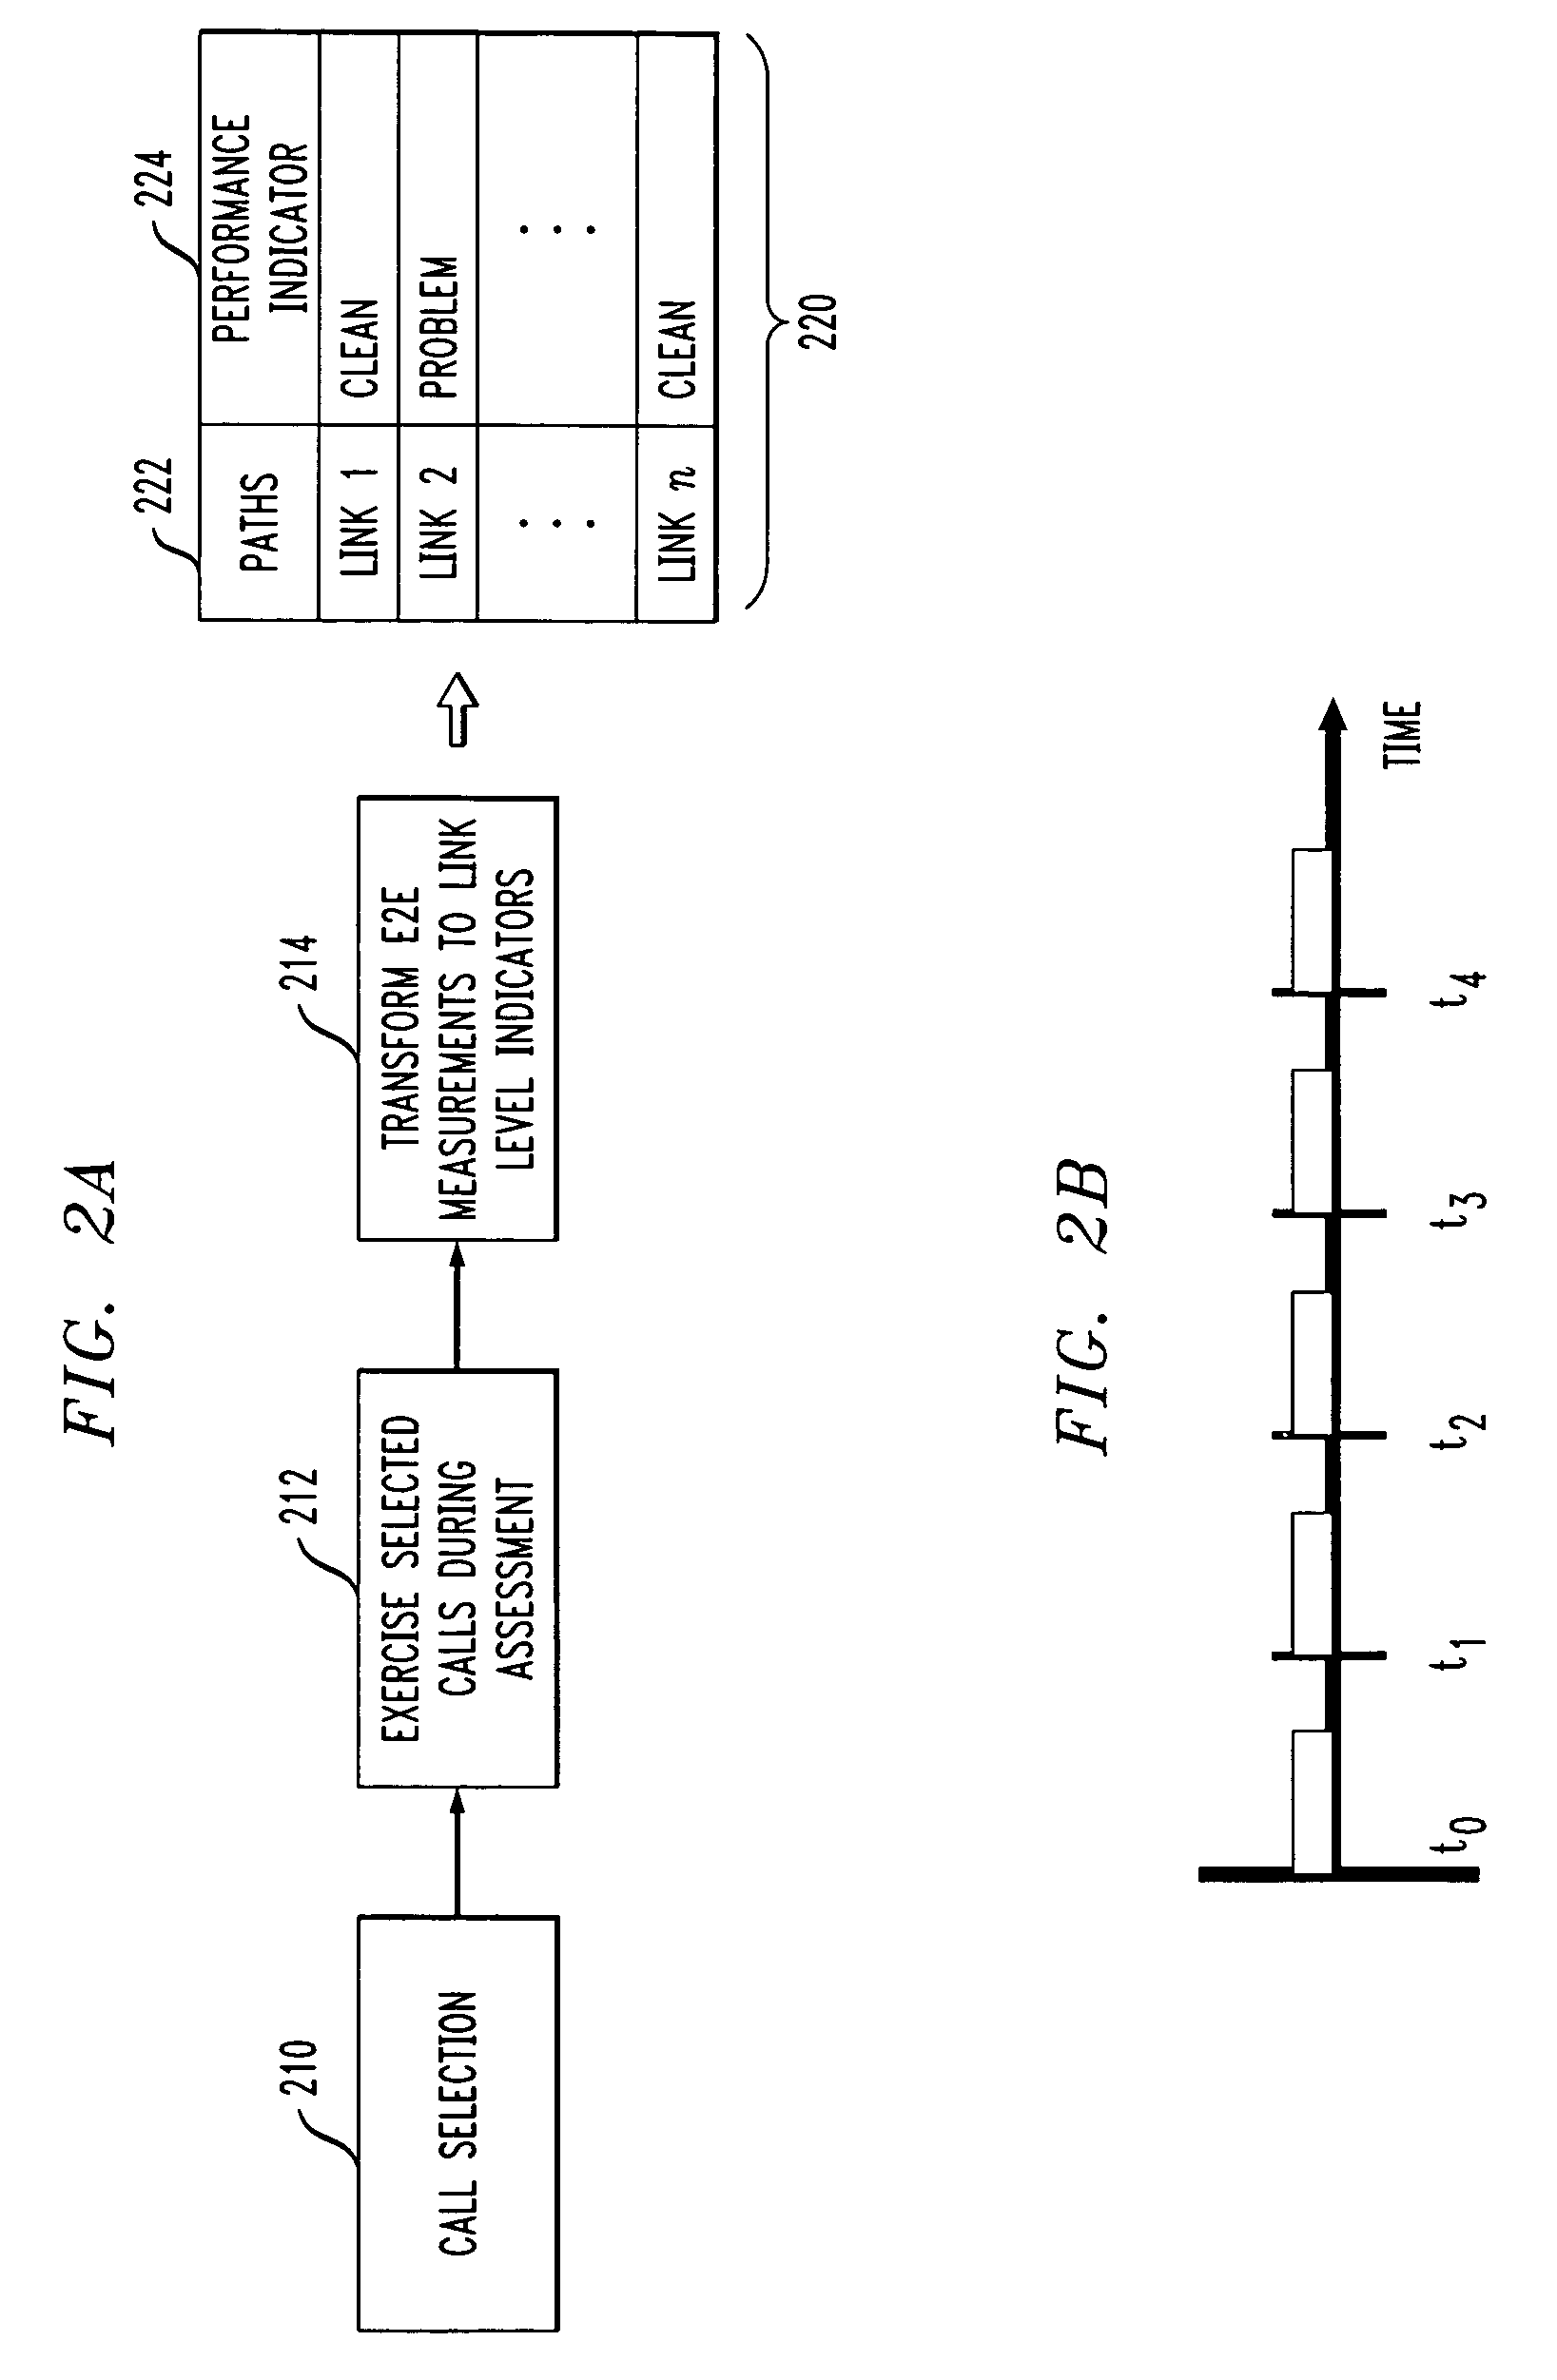 Determination of endpoint device location for efficient analysis of network performance